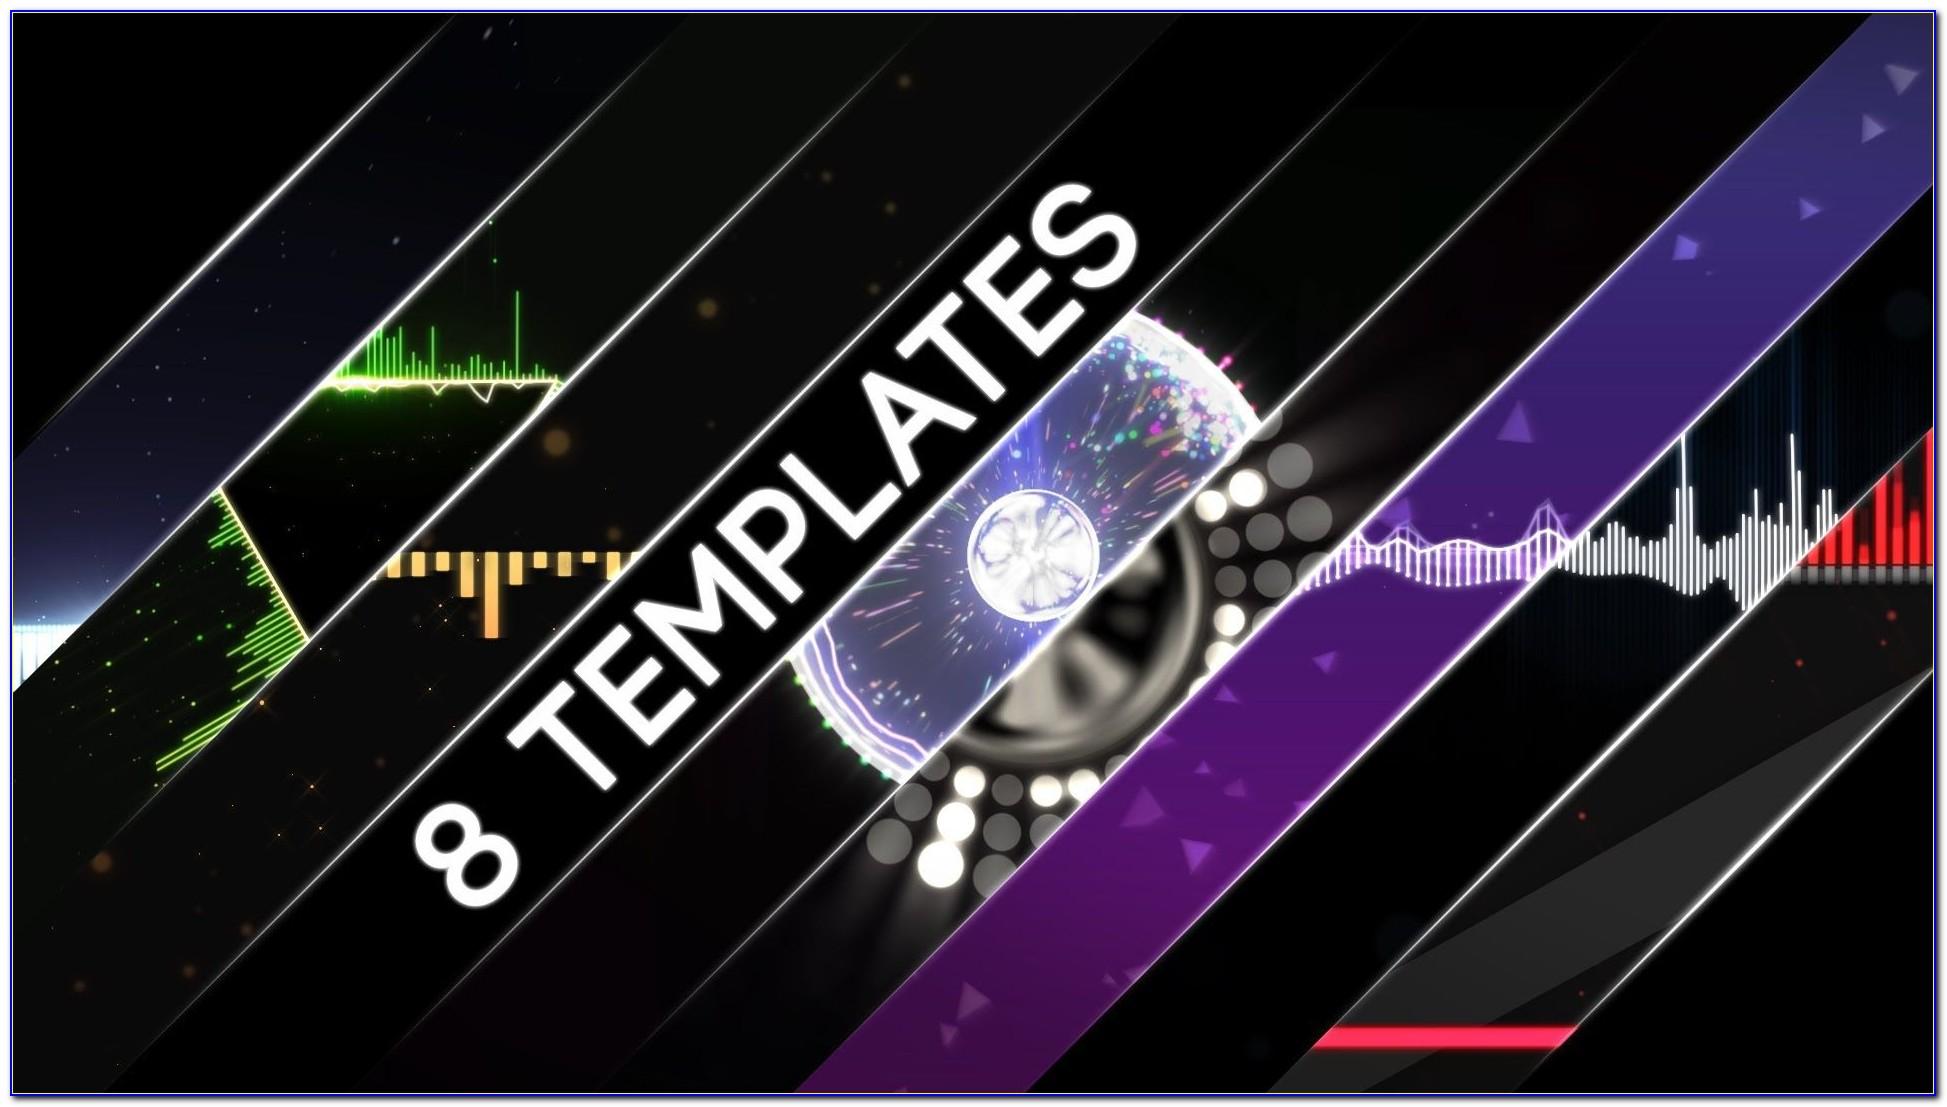 After Effects Cs6 Intro Templates Free Download